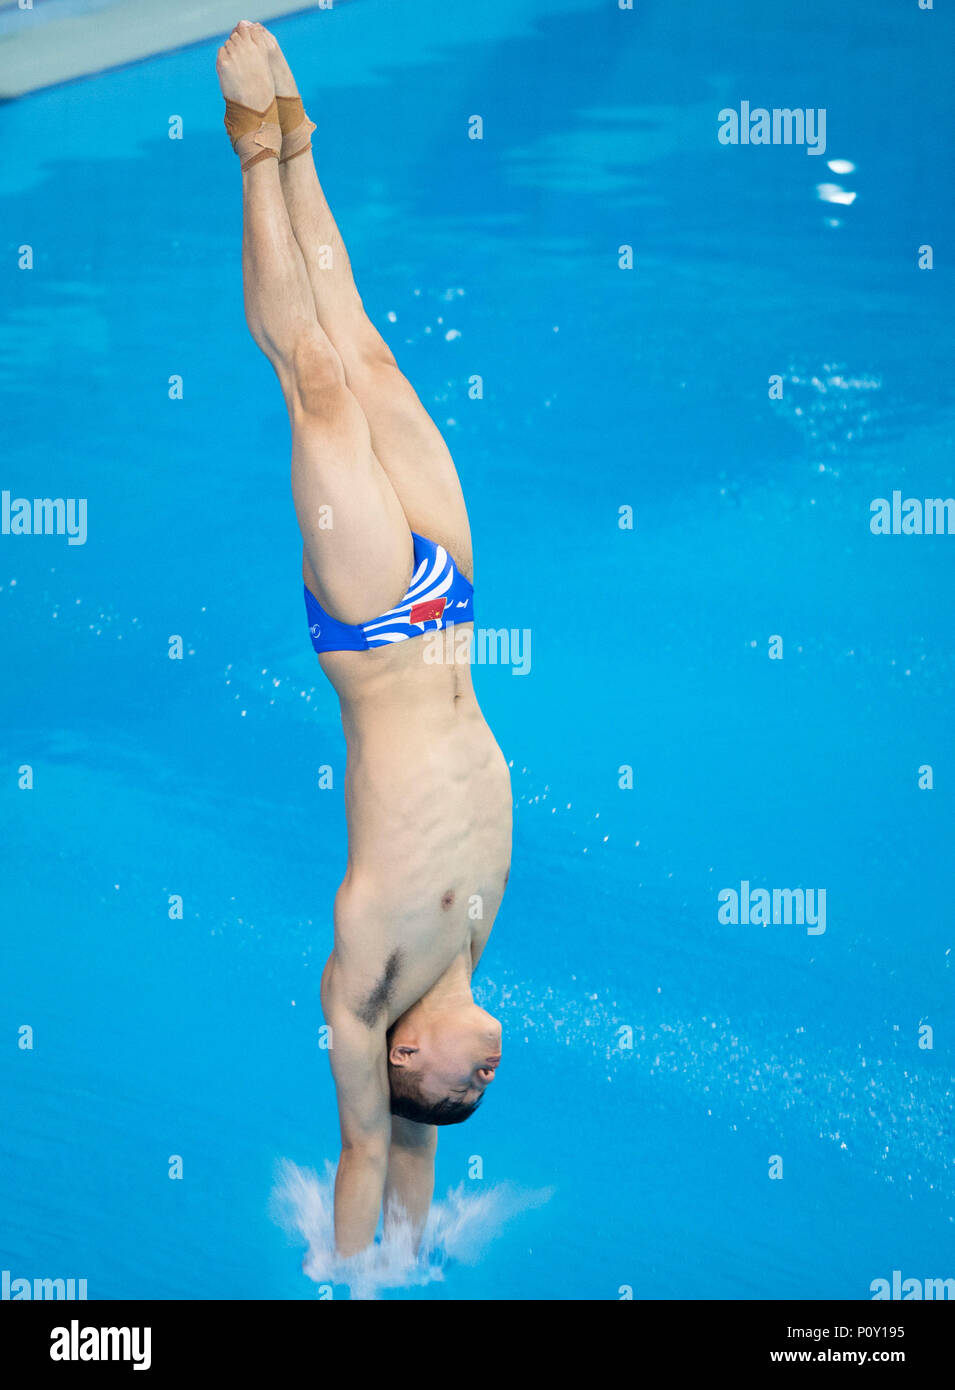 Wuhan. 10th June, 2018. Chen Aisen of China competes during the men's 10m platform final at the FINA Diving World Cup 2018 in Wuhan, central China's Hubei Province on June 10, 2018. Chen claimed the title with a total of 557.80 points. Credit: Xiao Yijiu/Xinhua/Alamy Live News Stock Photo